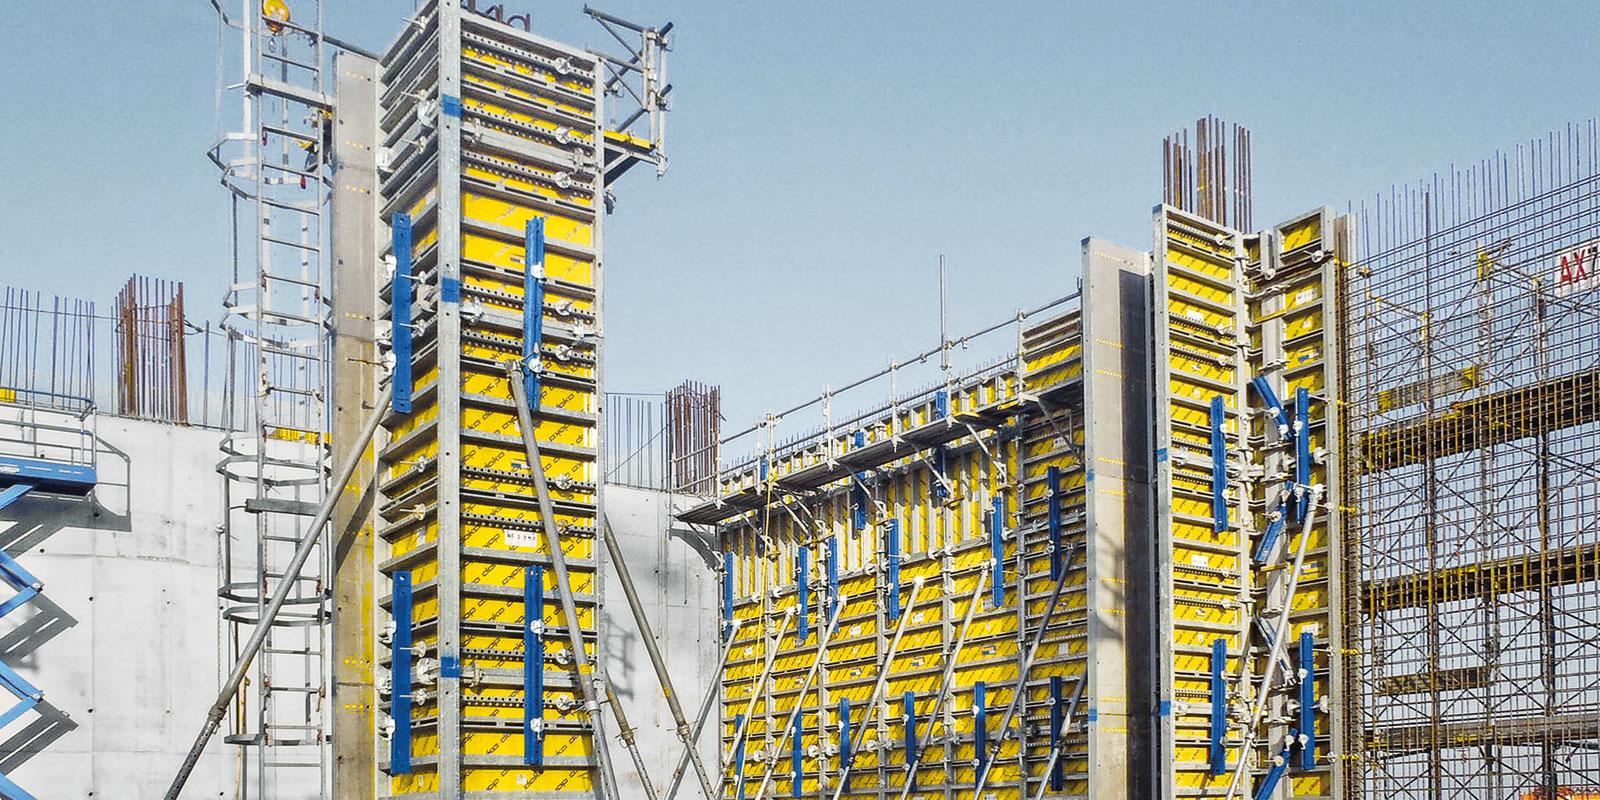 What Need To Consider When Choosing Formwork?